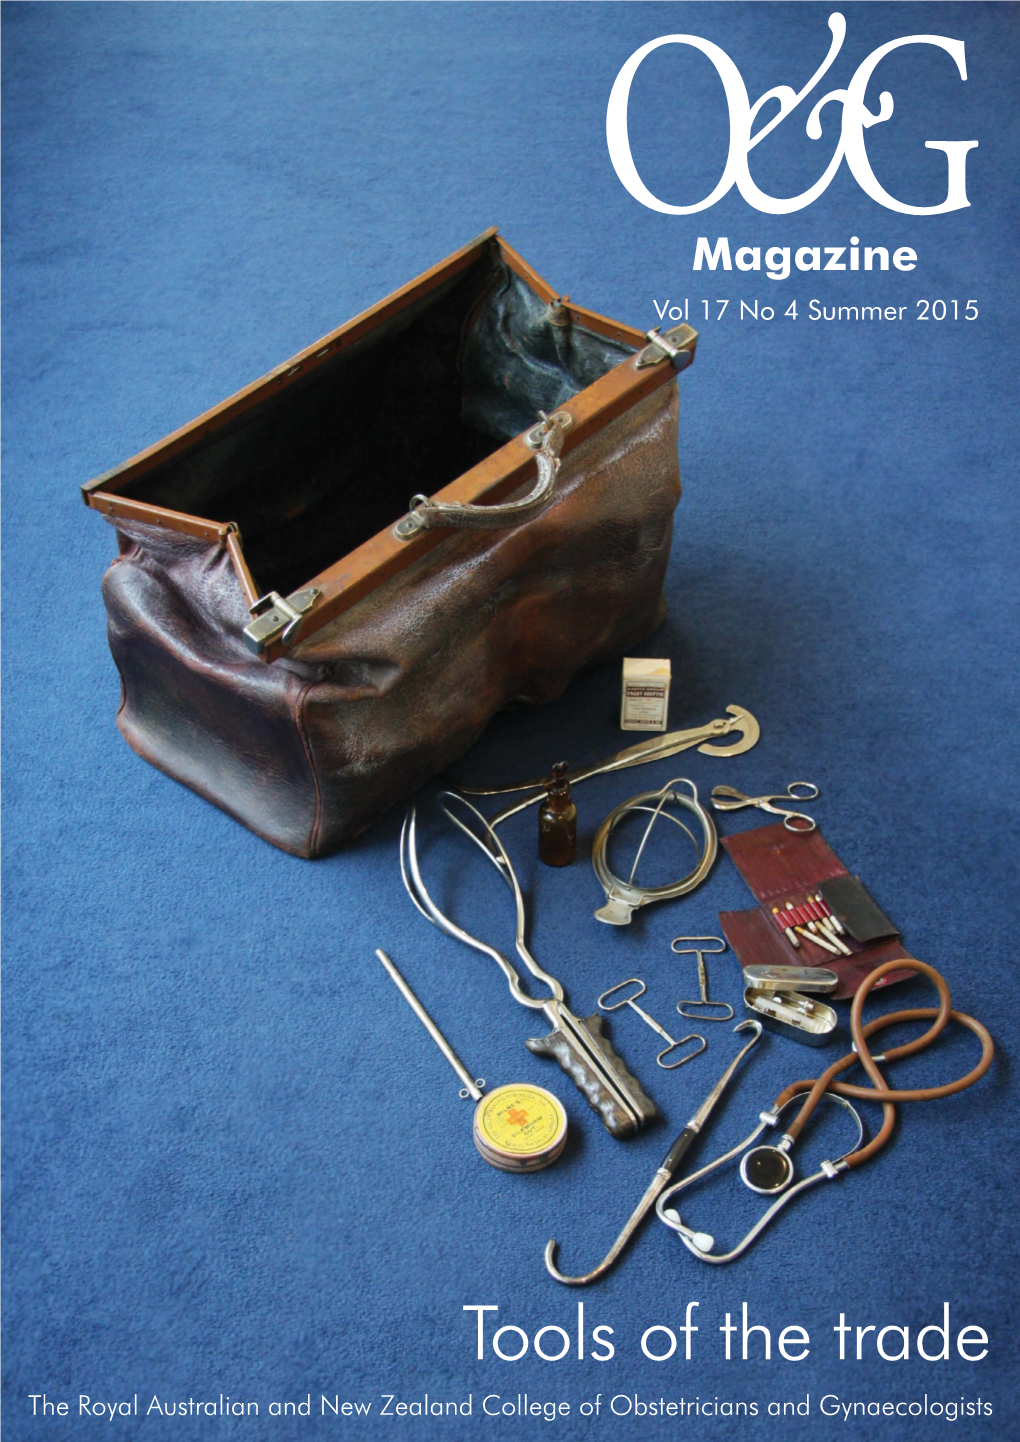 O&G Magazine Summer 2015 Tools of the Trade